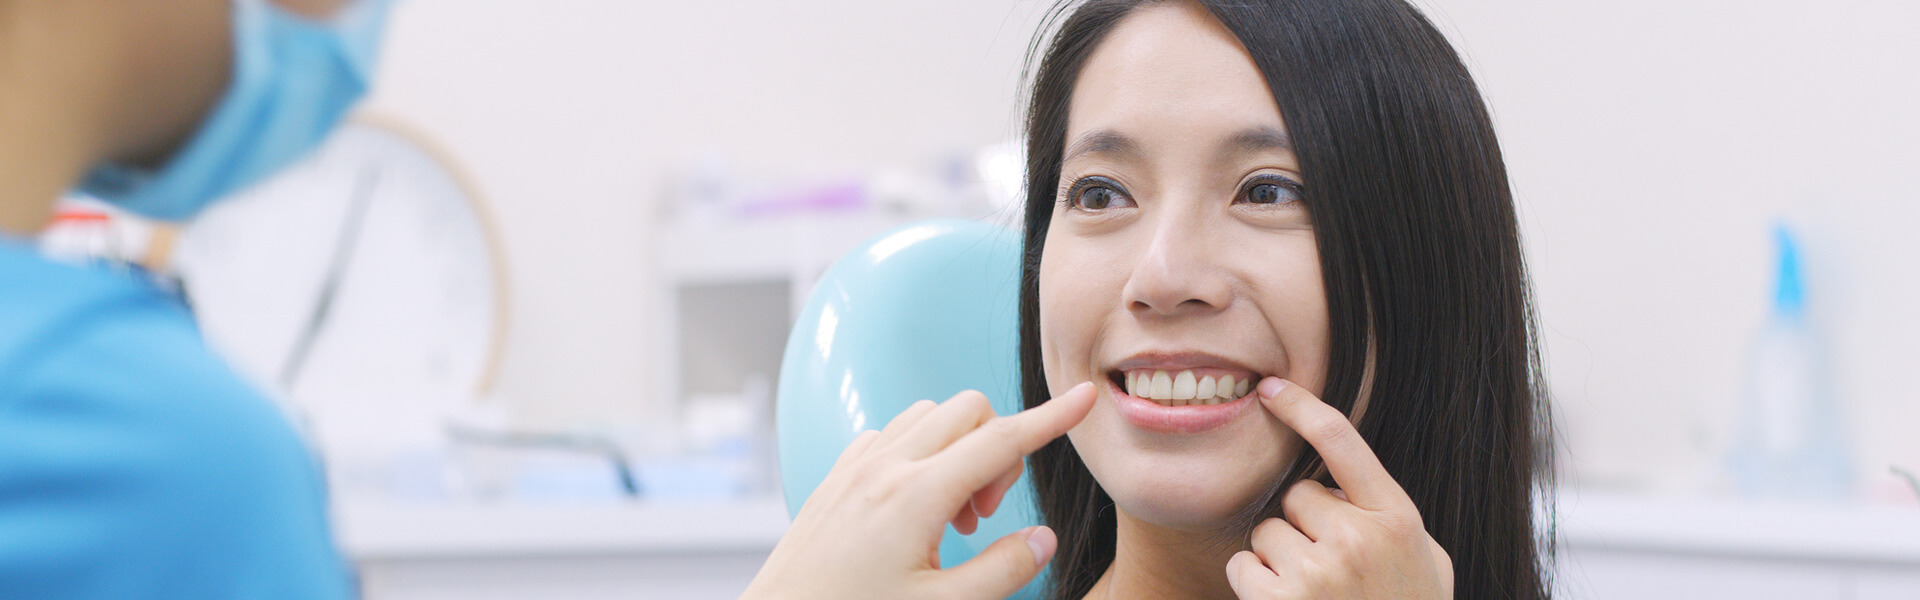 Female patient at dental clinic pointing at her implant tooth